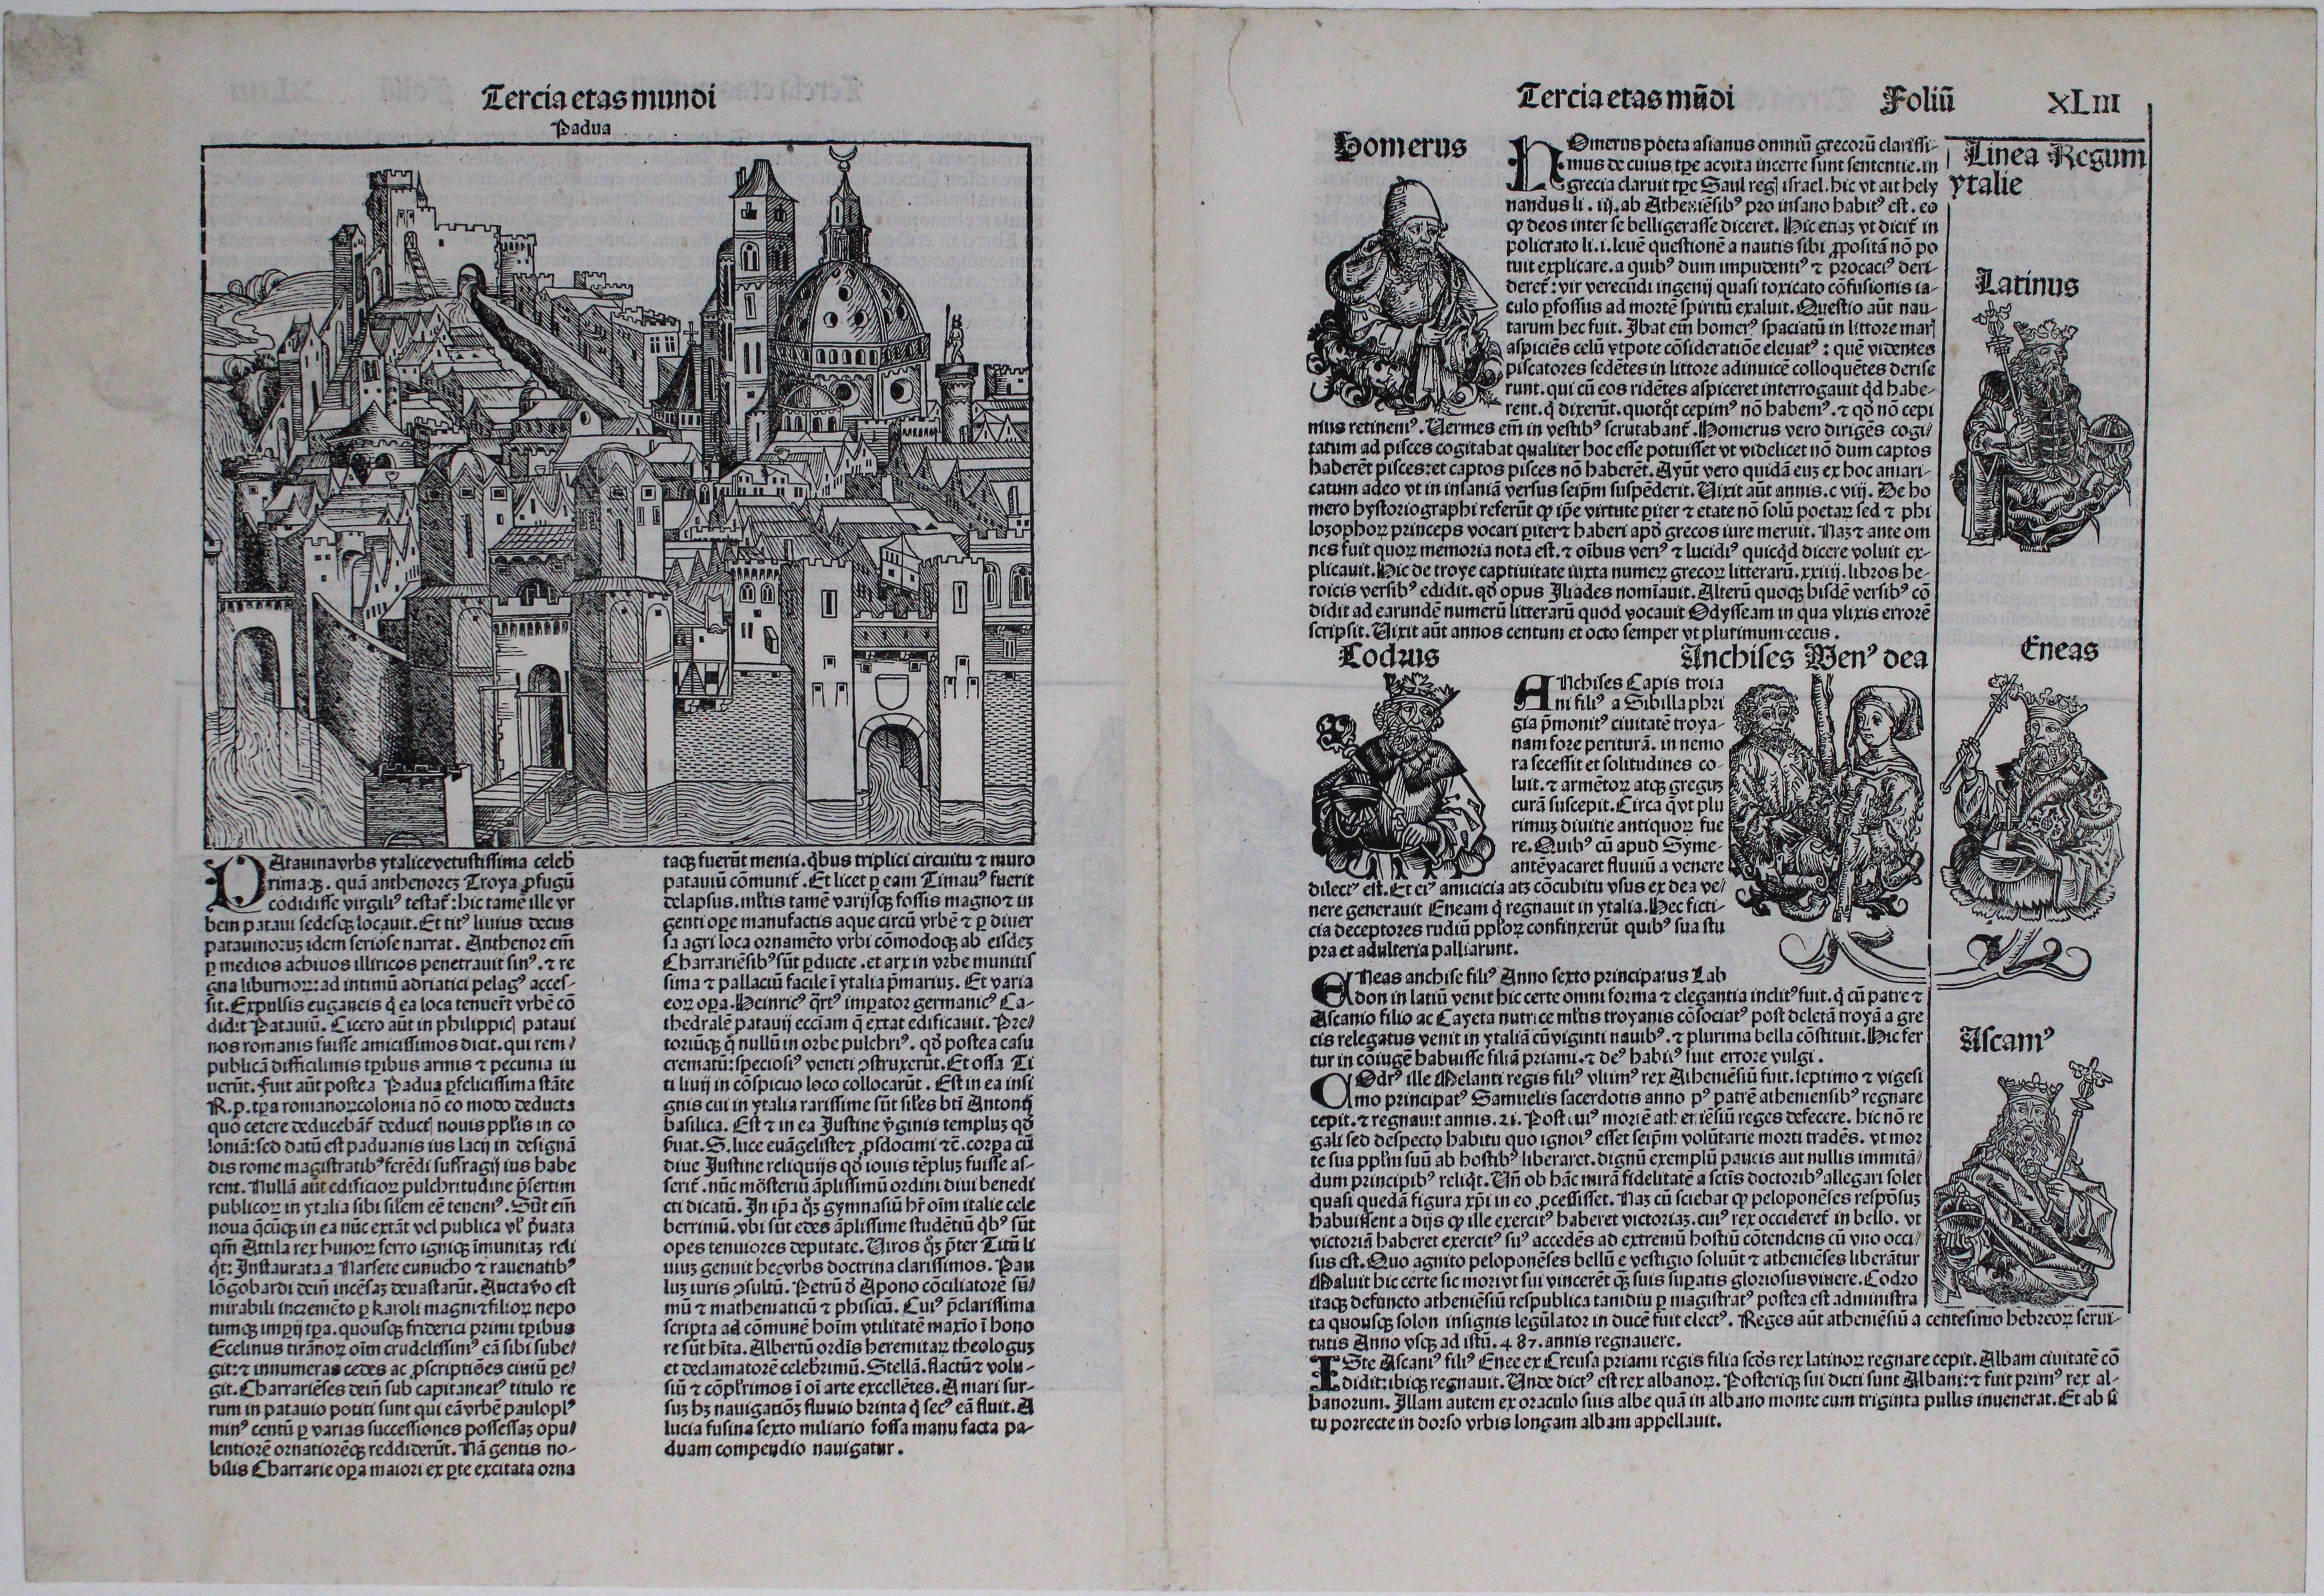 The Nuremberg Chronicle Map of Venice